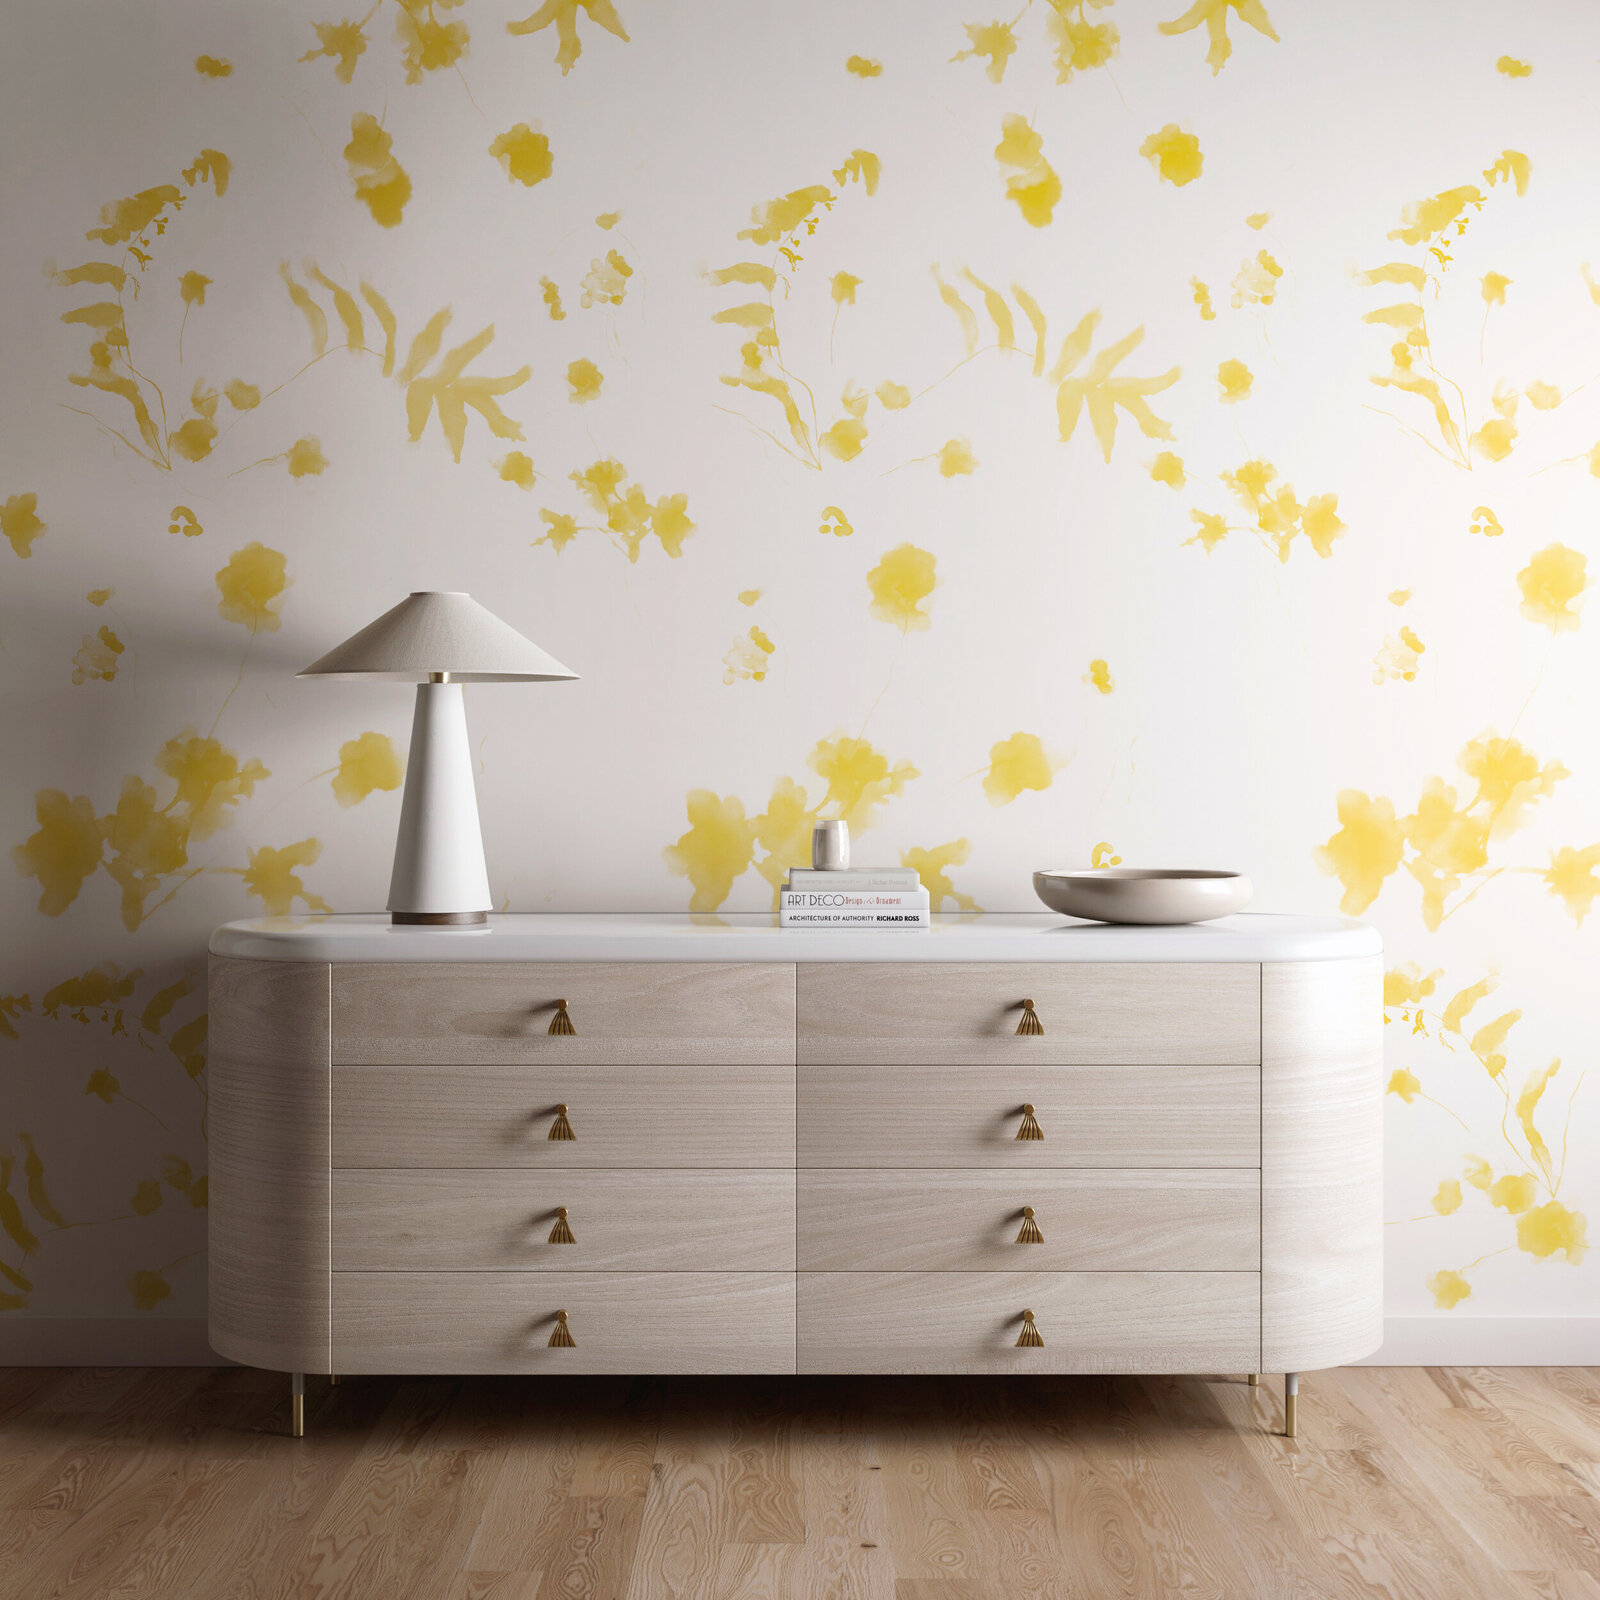 Surface Pattern Design and Art Licensing by Lucia Pador - Greenhouse for drop it Modern - yellow